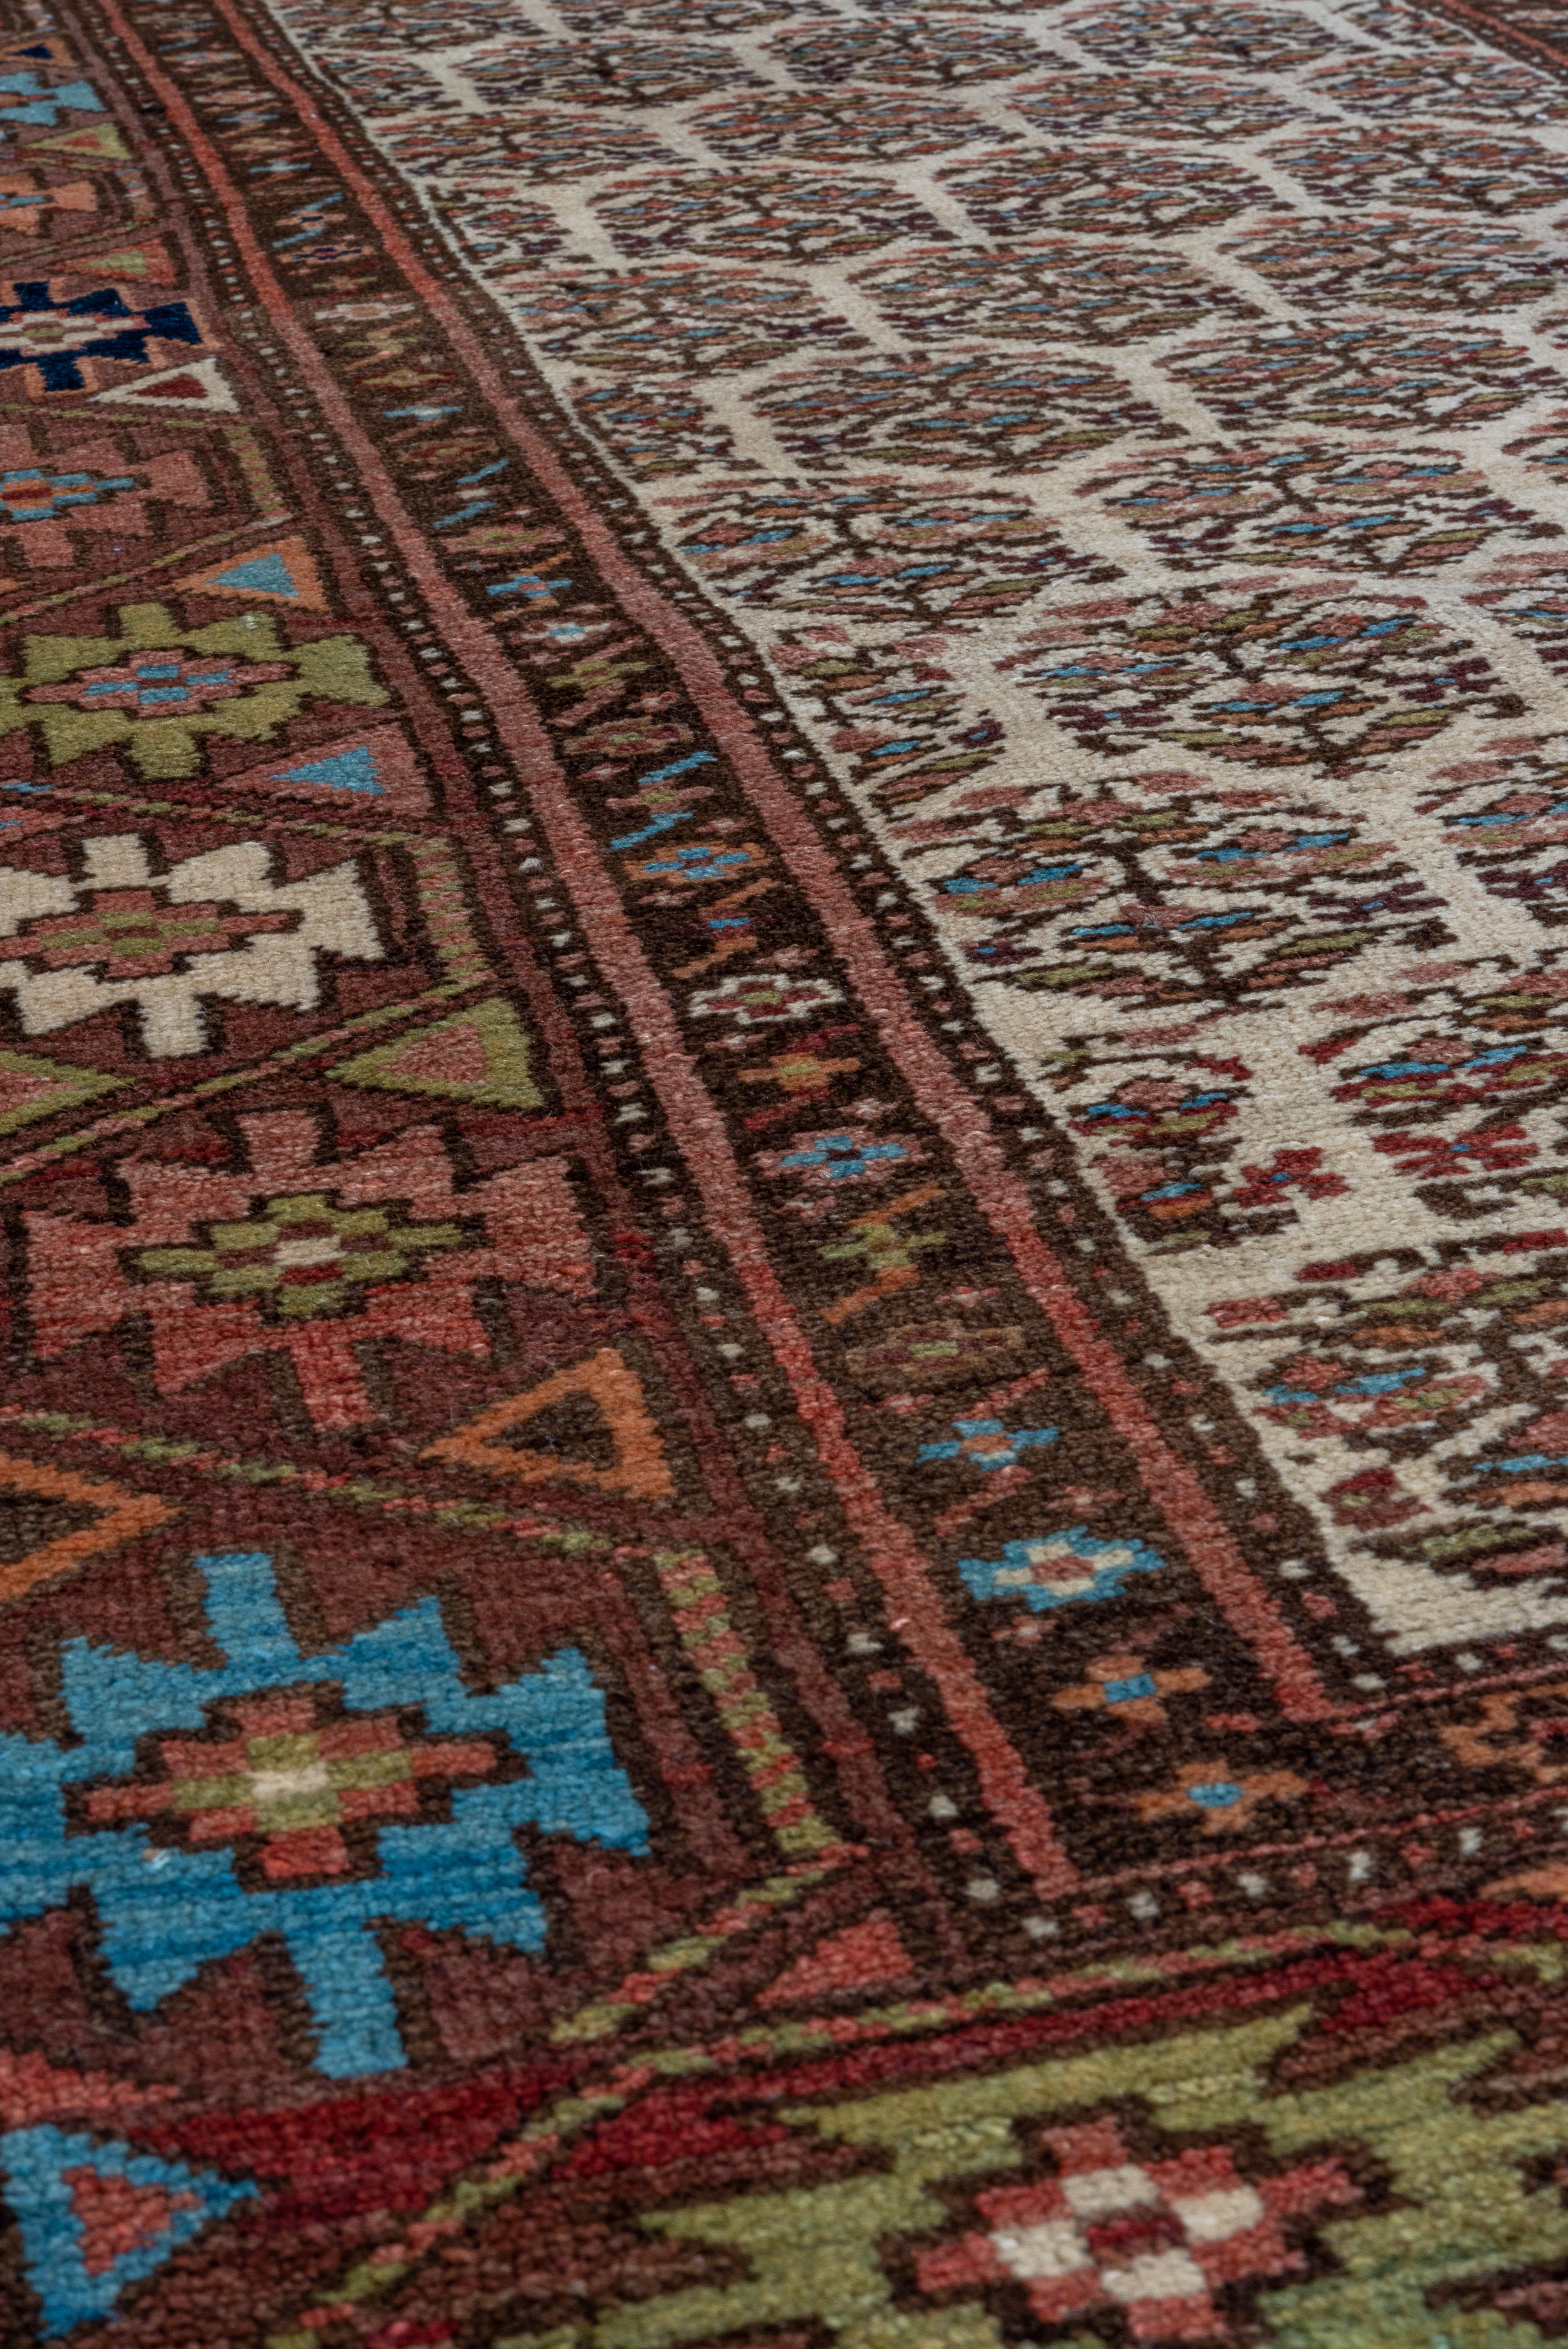 Kurdish rugs  are traditional hand-woven textiles originating from the Kurdish regions, which span across parts of Turkey, Iran, Iraq, and Syria. These rugs have a rich history and are highly regarded for their craftsmanship and unique designs.